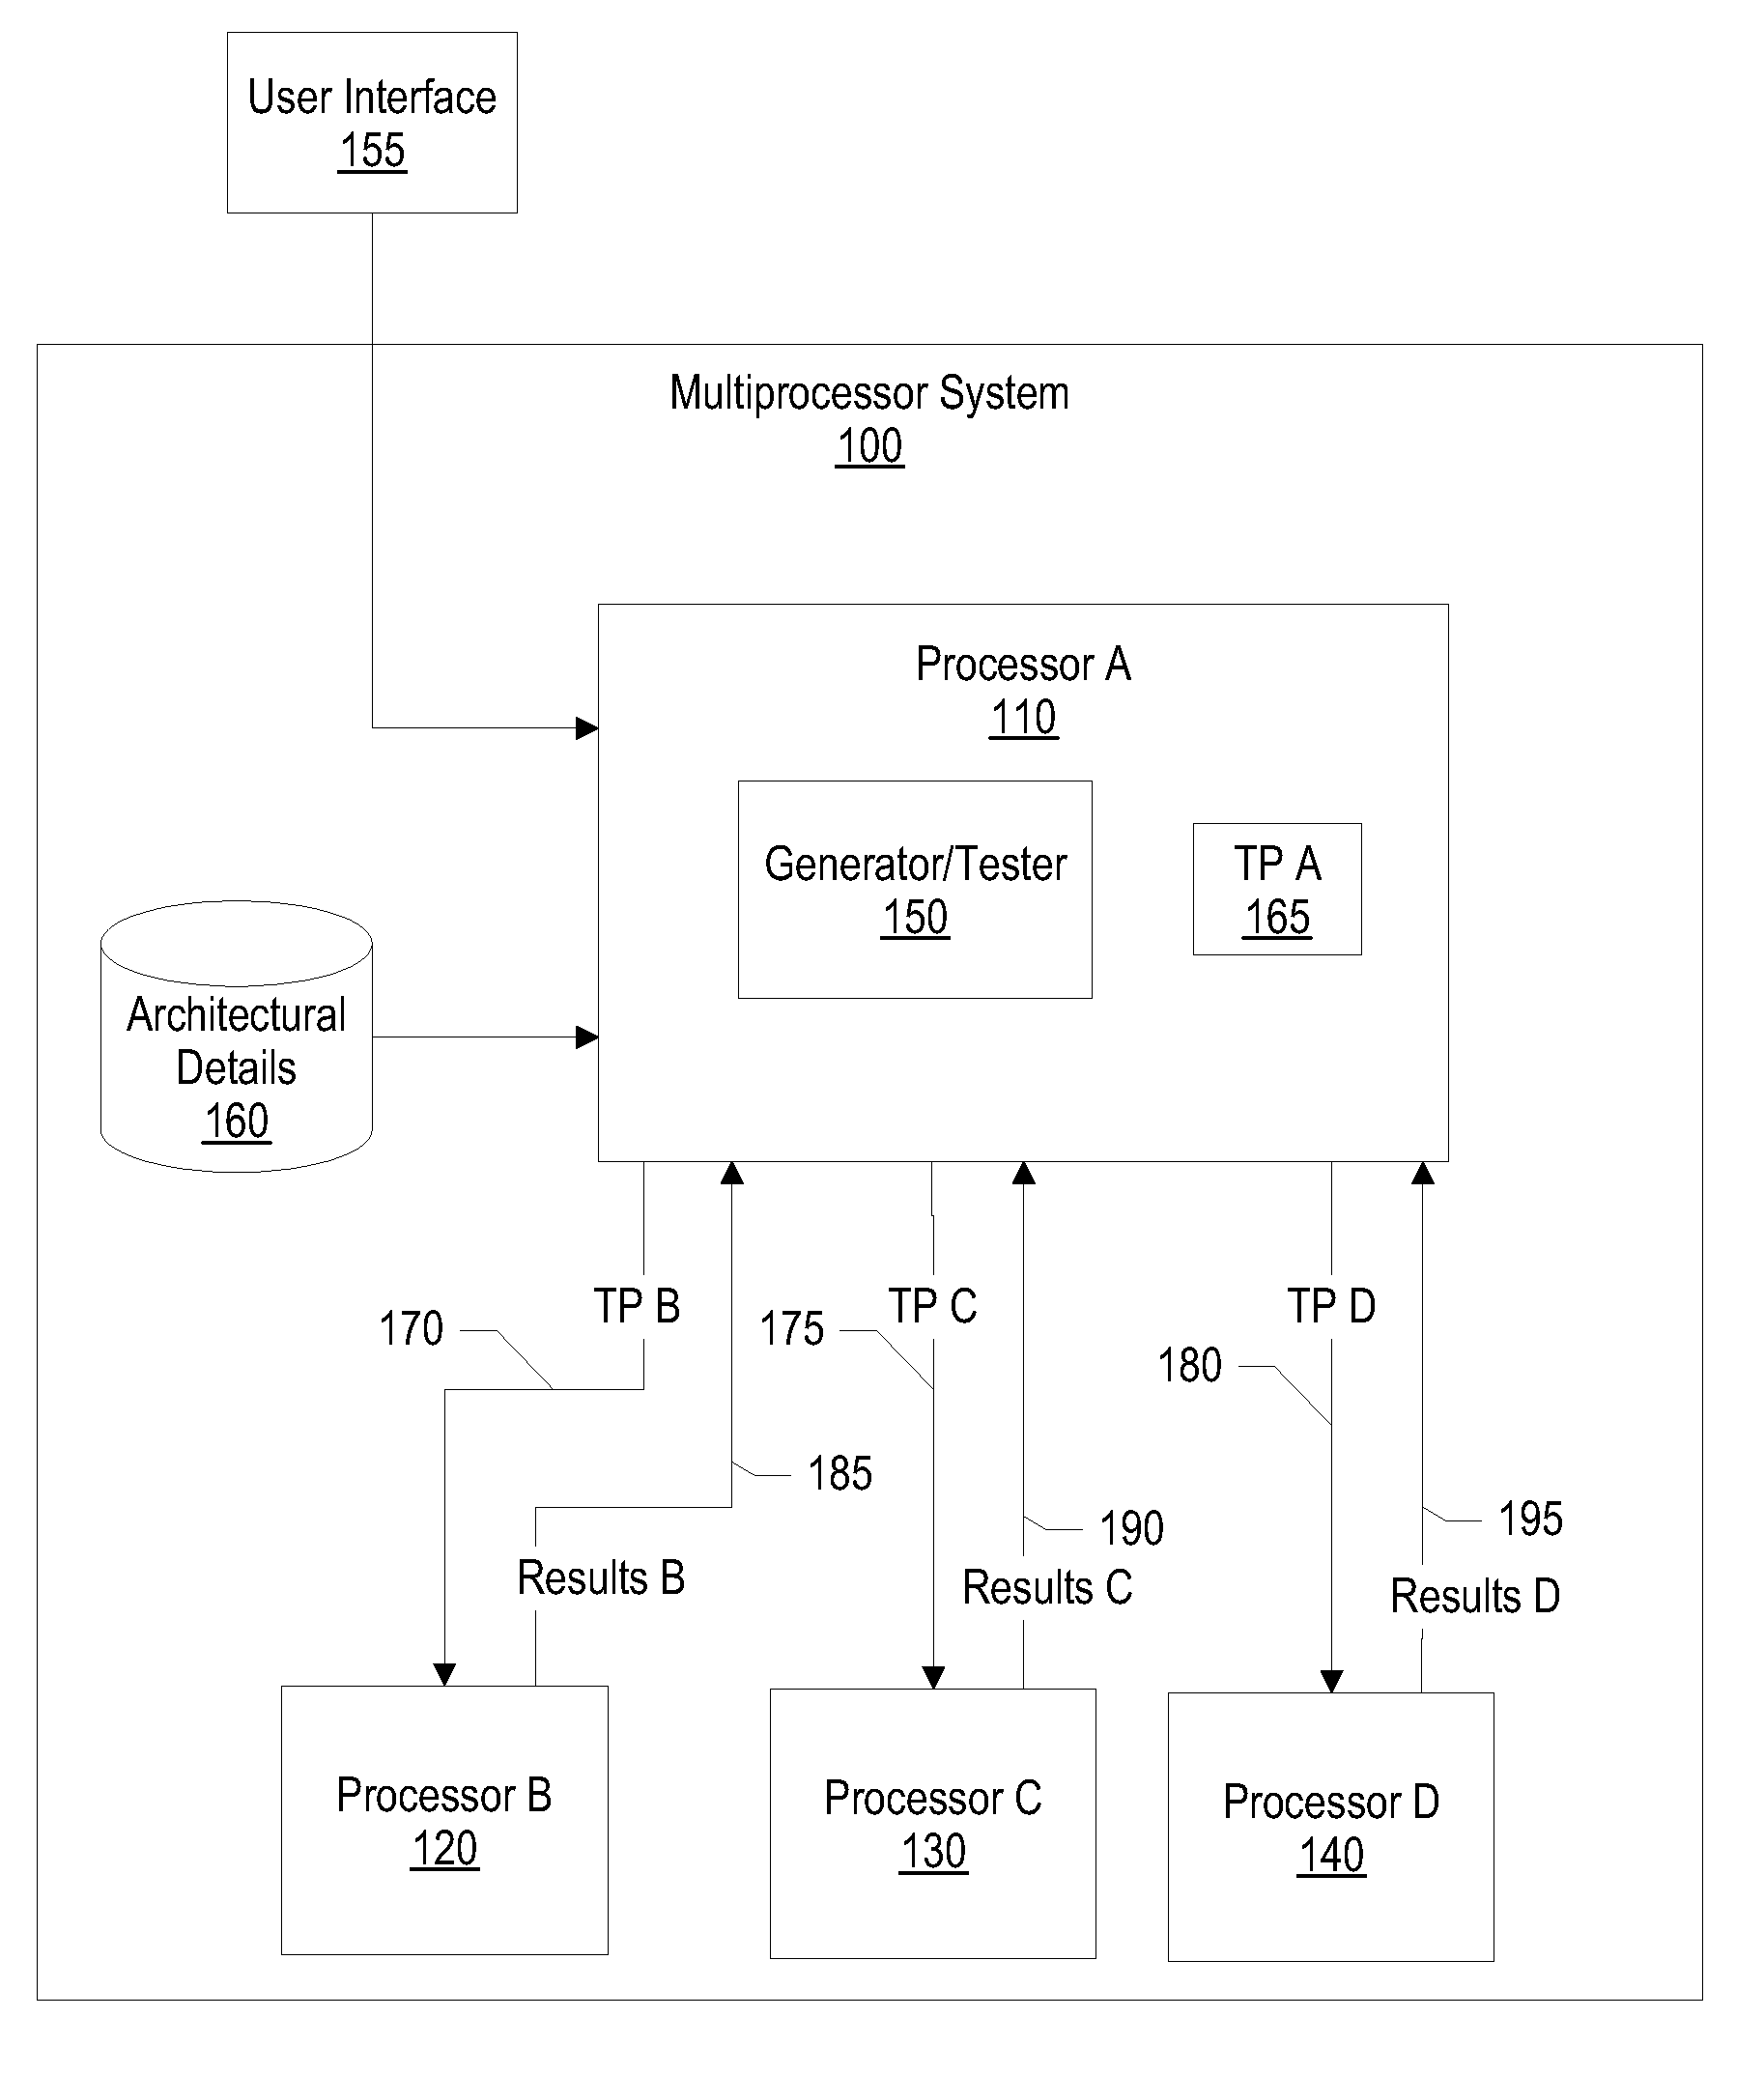 System and Method for Predicting lwarx and stwcx Instructions in Test Pattern Generation and Simulation for Processor Design Verification and Validation